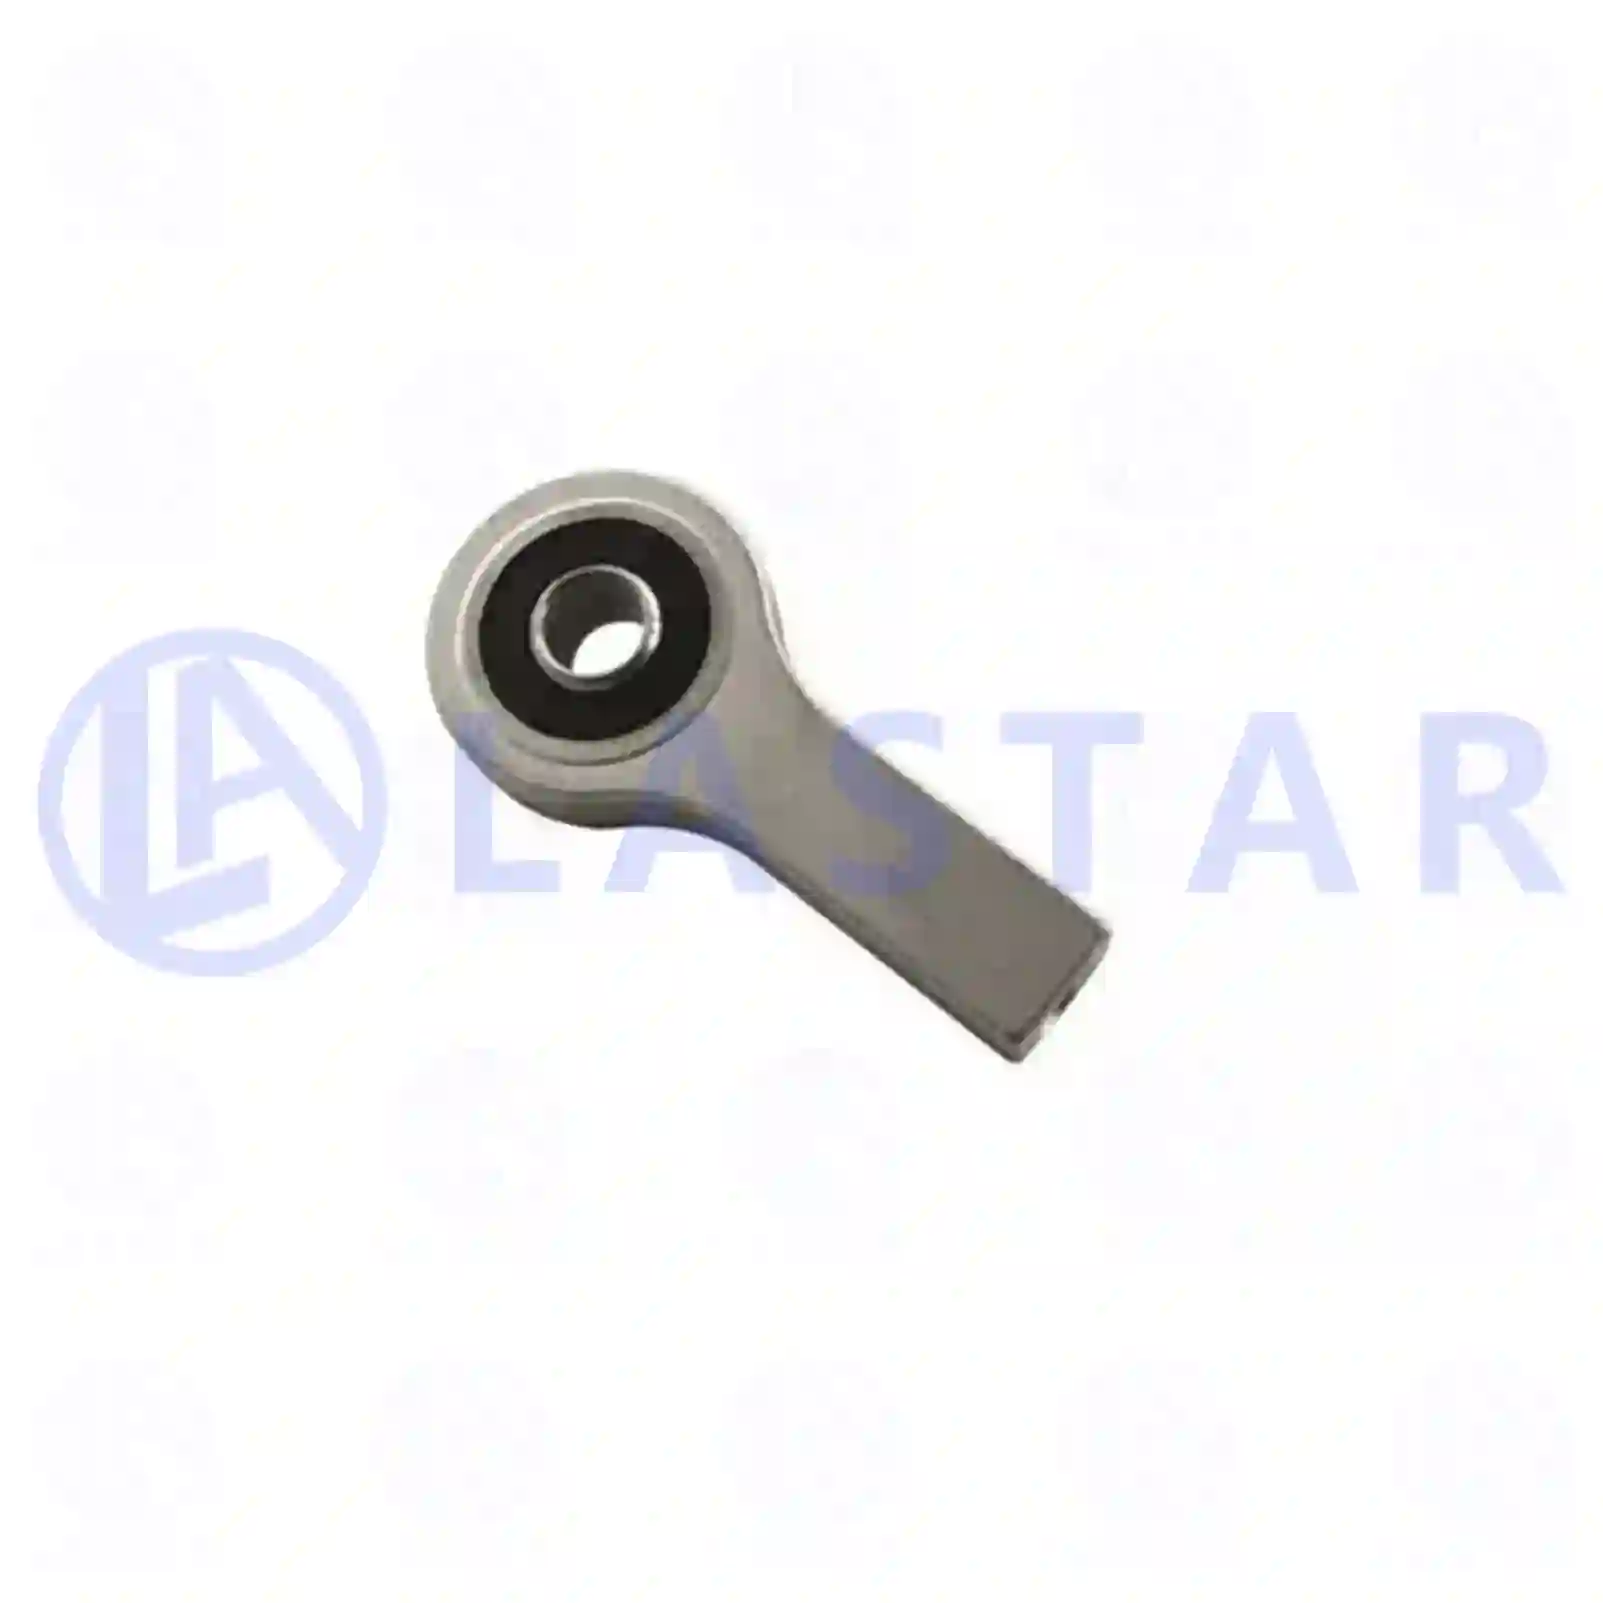 Bearing joint, cabin shock absorber, 77735974, 2094316, ZG40853-0008, ||  77735974 Lastar Spare Part | Truck Spare Parts, Auotomotive Spare Parts Bearing joint, cabin shock absorber, 77735974, 2094316, ZG40853-0008, ||  77735974 Lastar Spare Part | Truck Spare Parts, Auotomotive Spare Parts